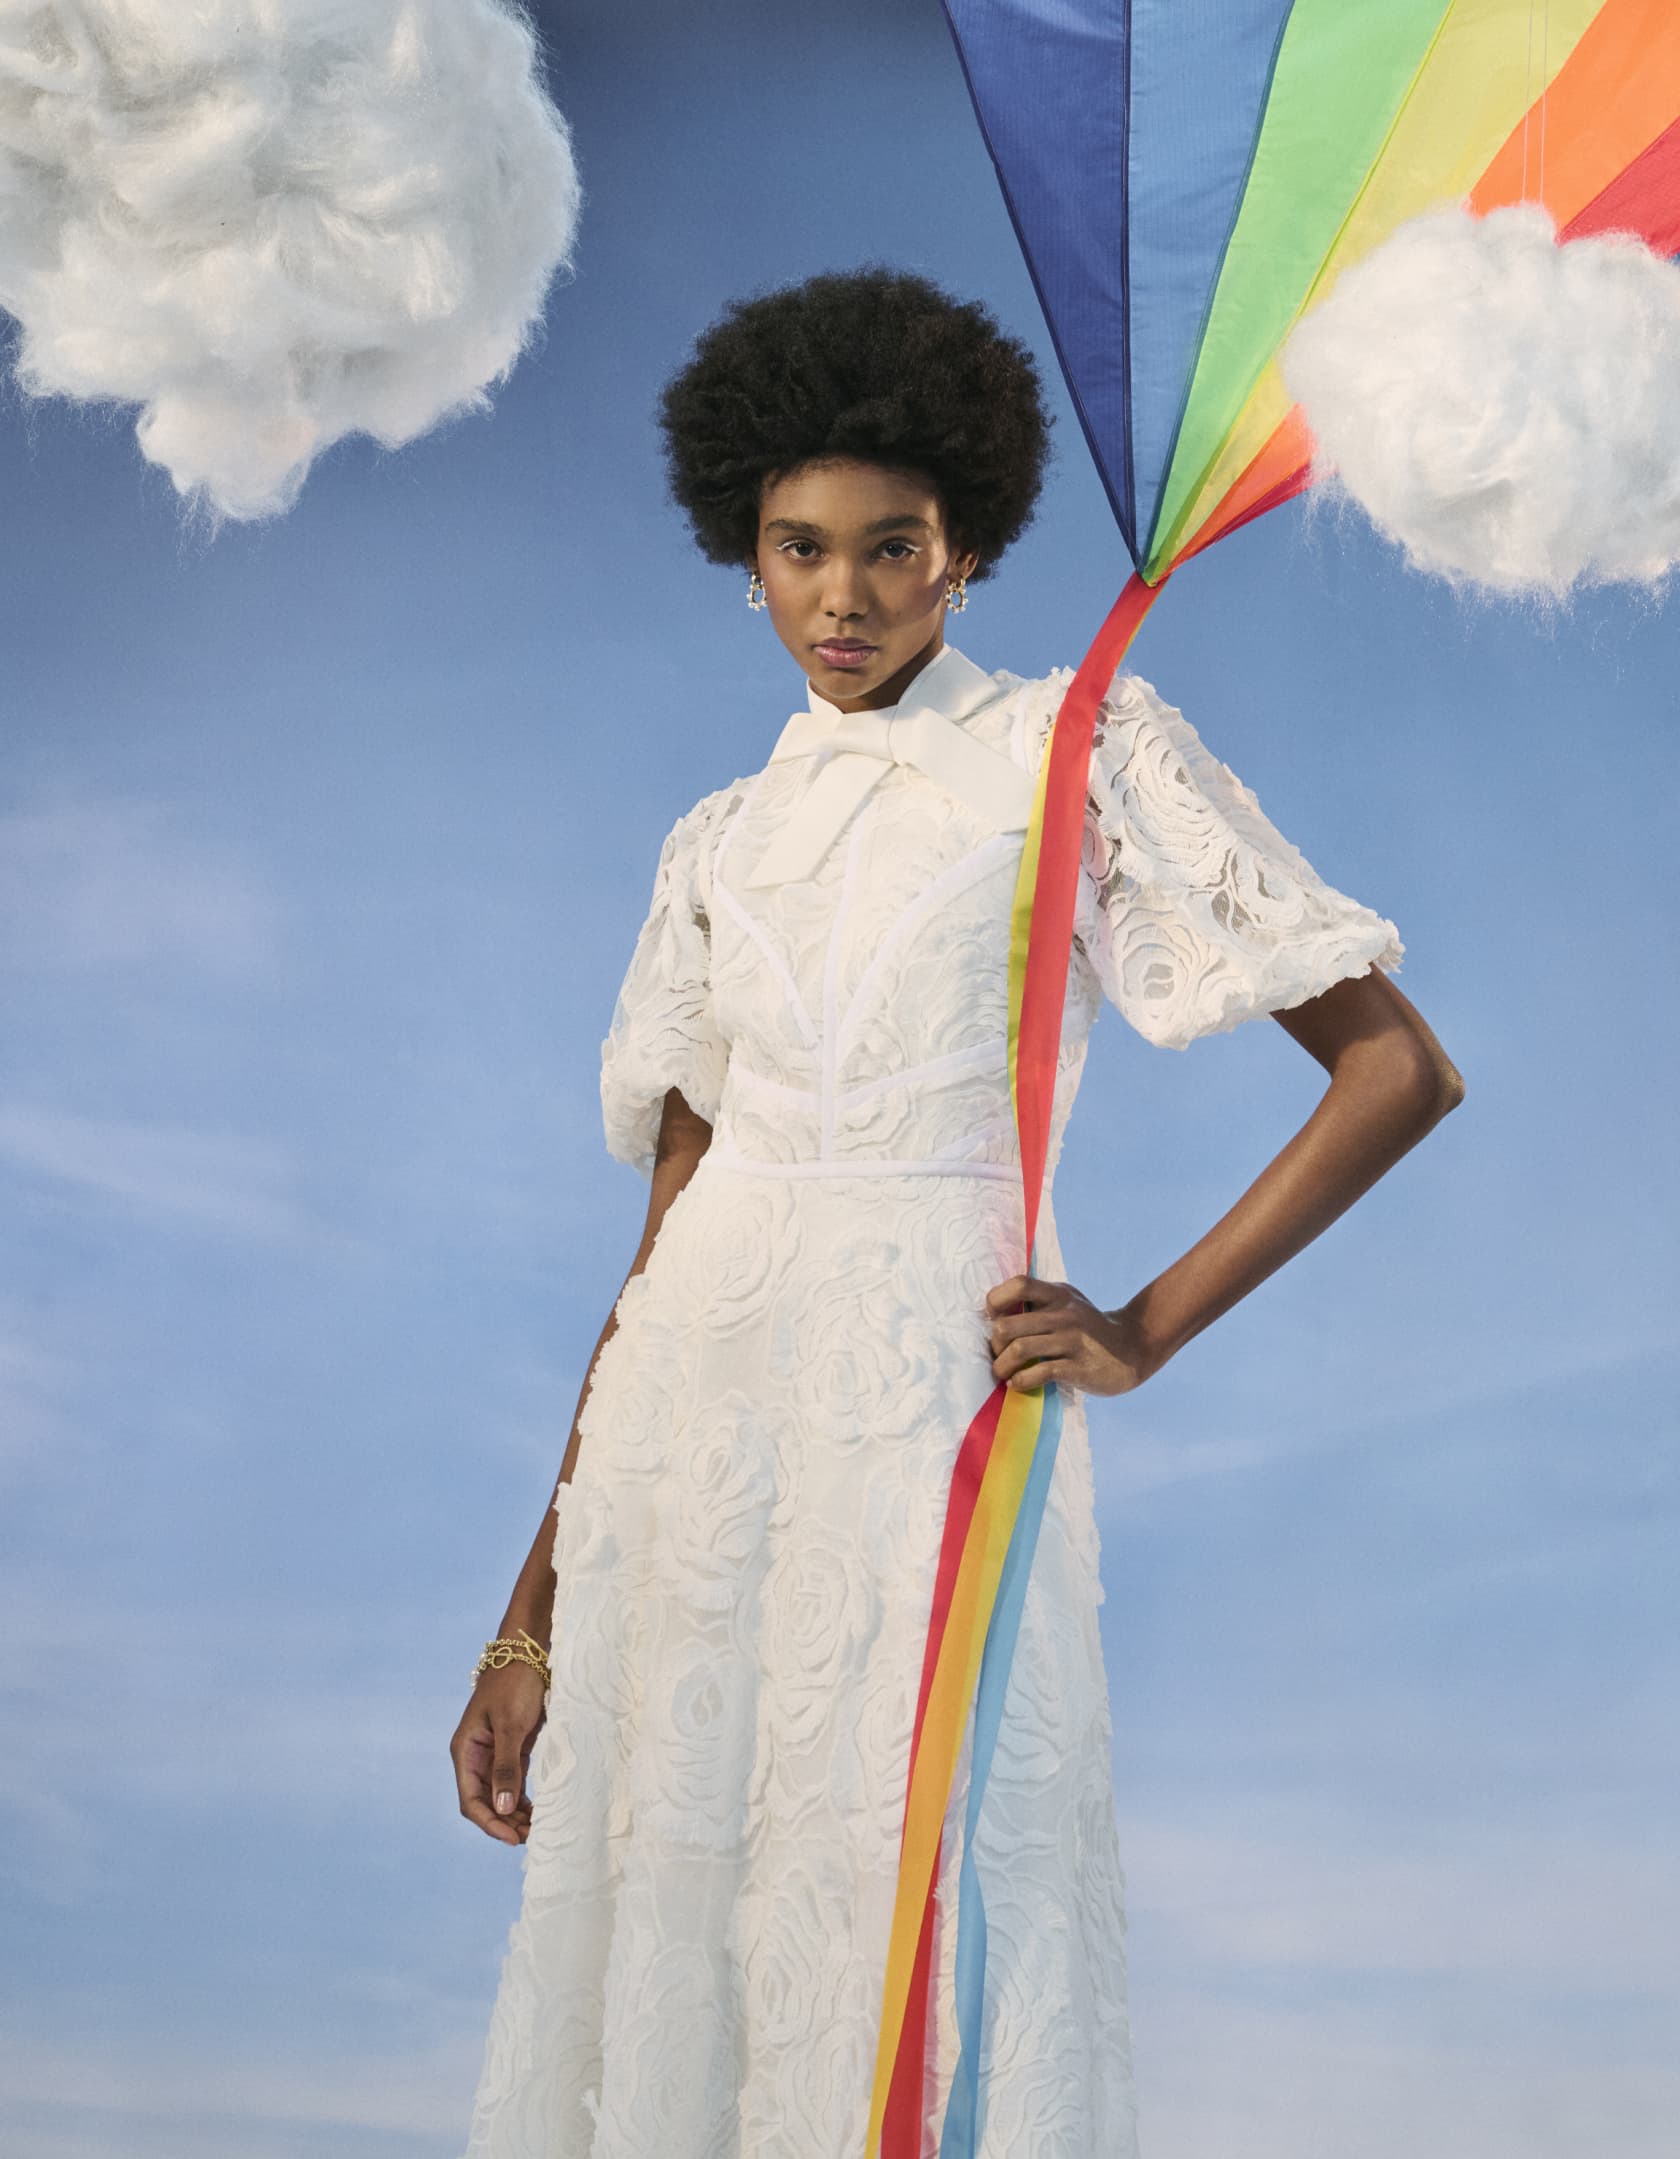 Woman in white dress holding a colourful kite